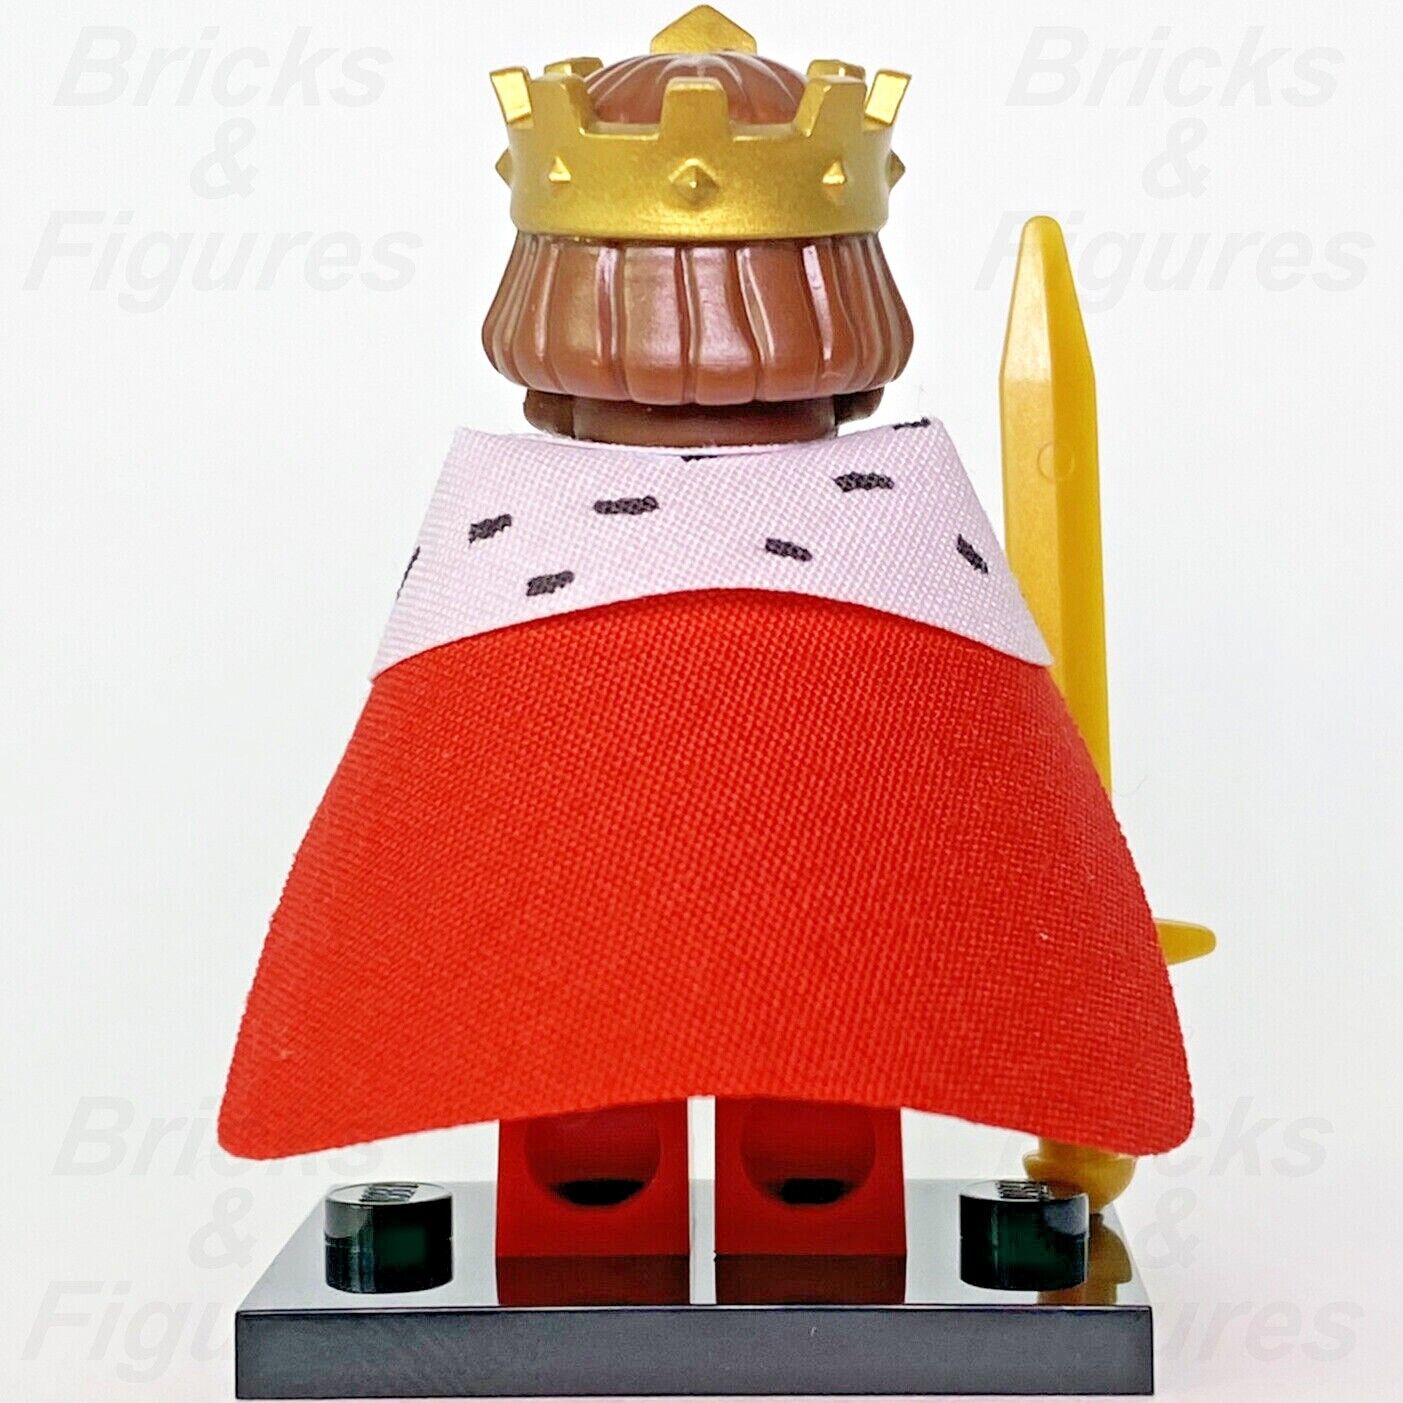 New Collectible Minifigures LEGO Classic King Series 13 Minifig 71008 col13-1 - Bricks & Figures